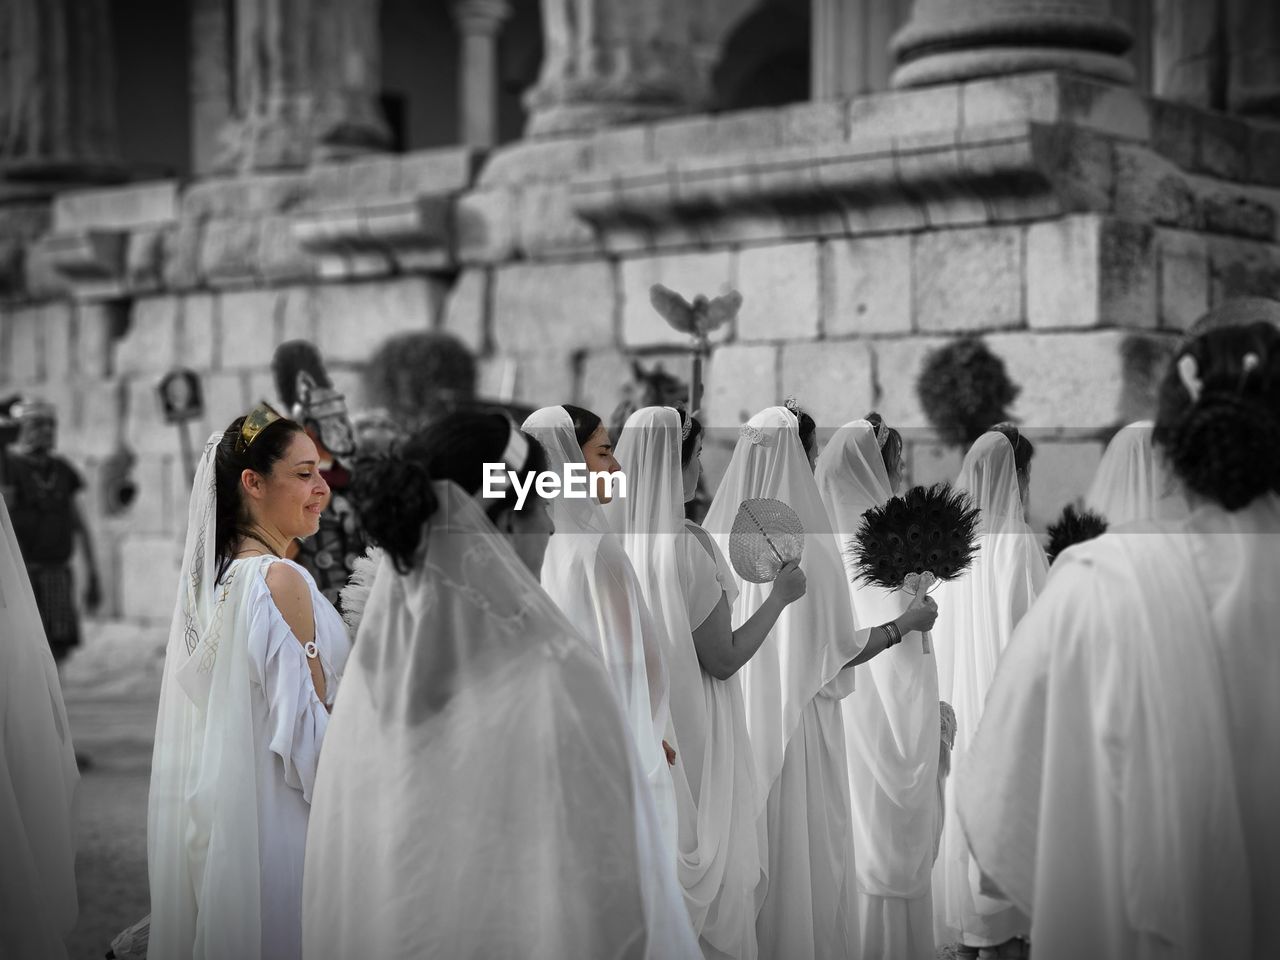 religion, belief, spirituality, place of worship, ceremony, group of people, women, bride, adult, celebration, white, architecture, person, wedding dress, event, black and white, tradition, traditional clothing, clothing, catholicism, men, praying, wedding, monochrome, built structure, female, lifestyles